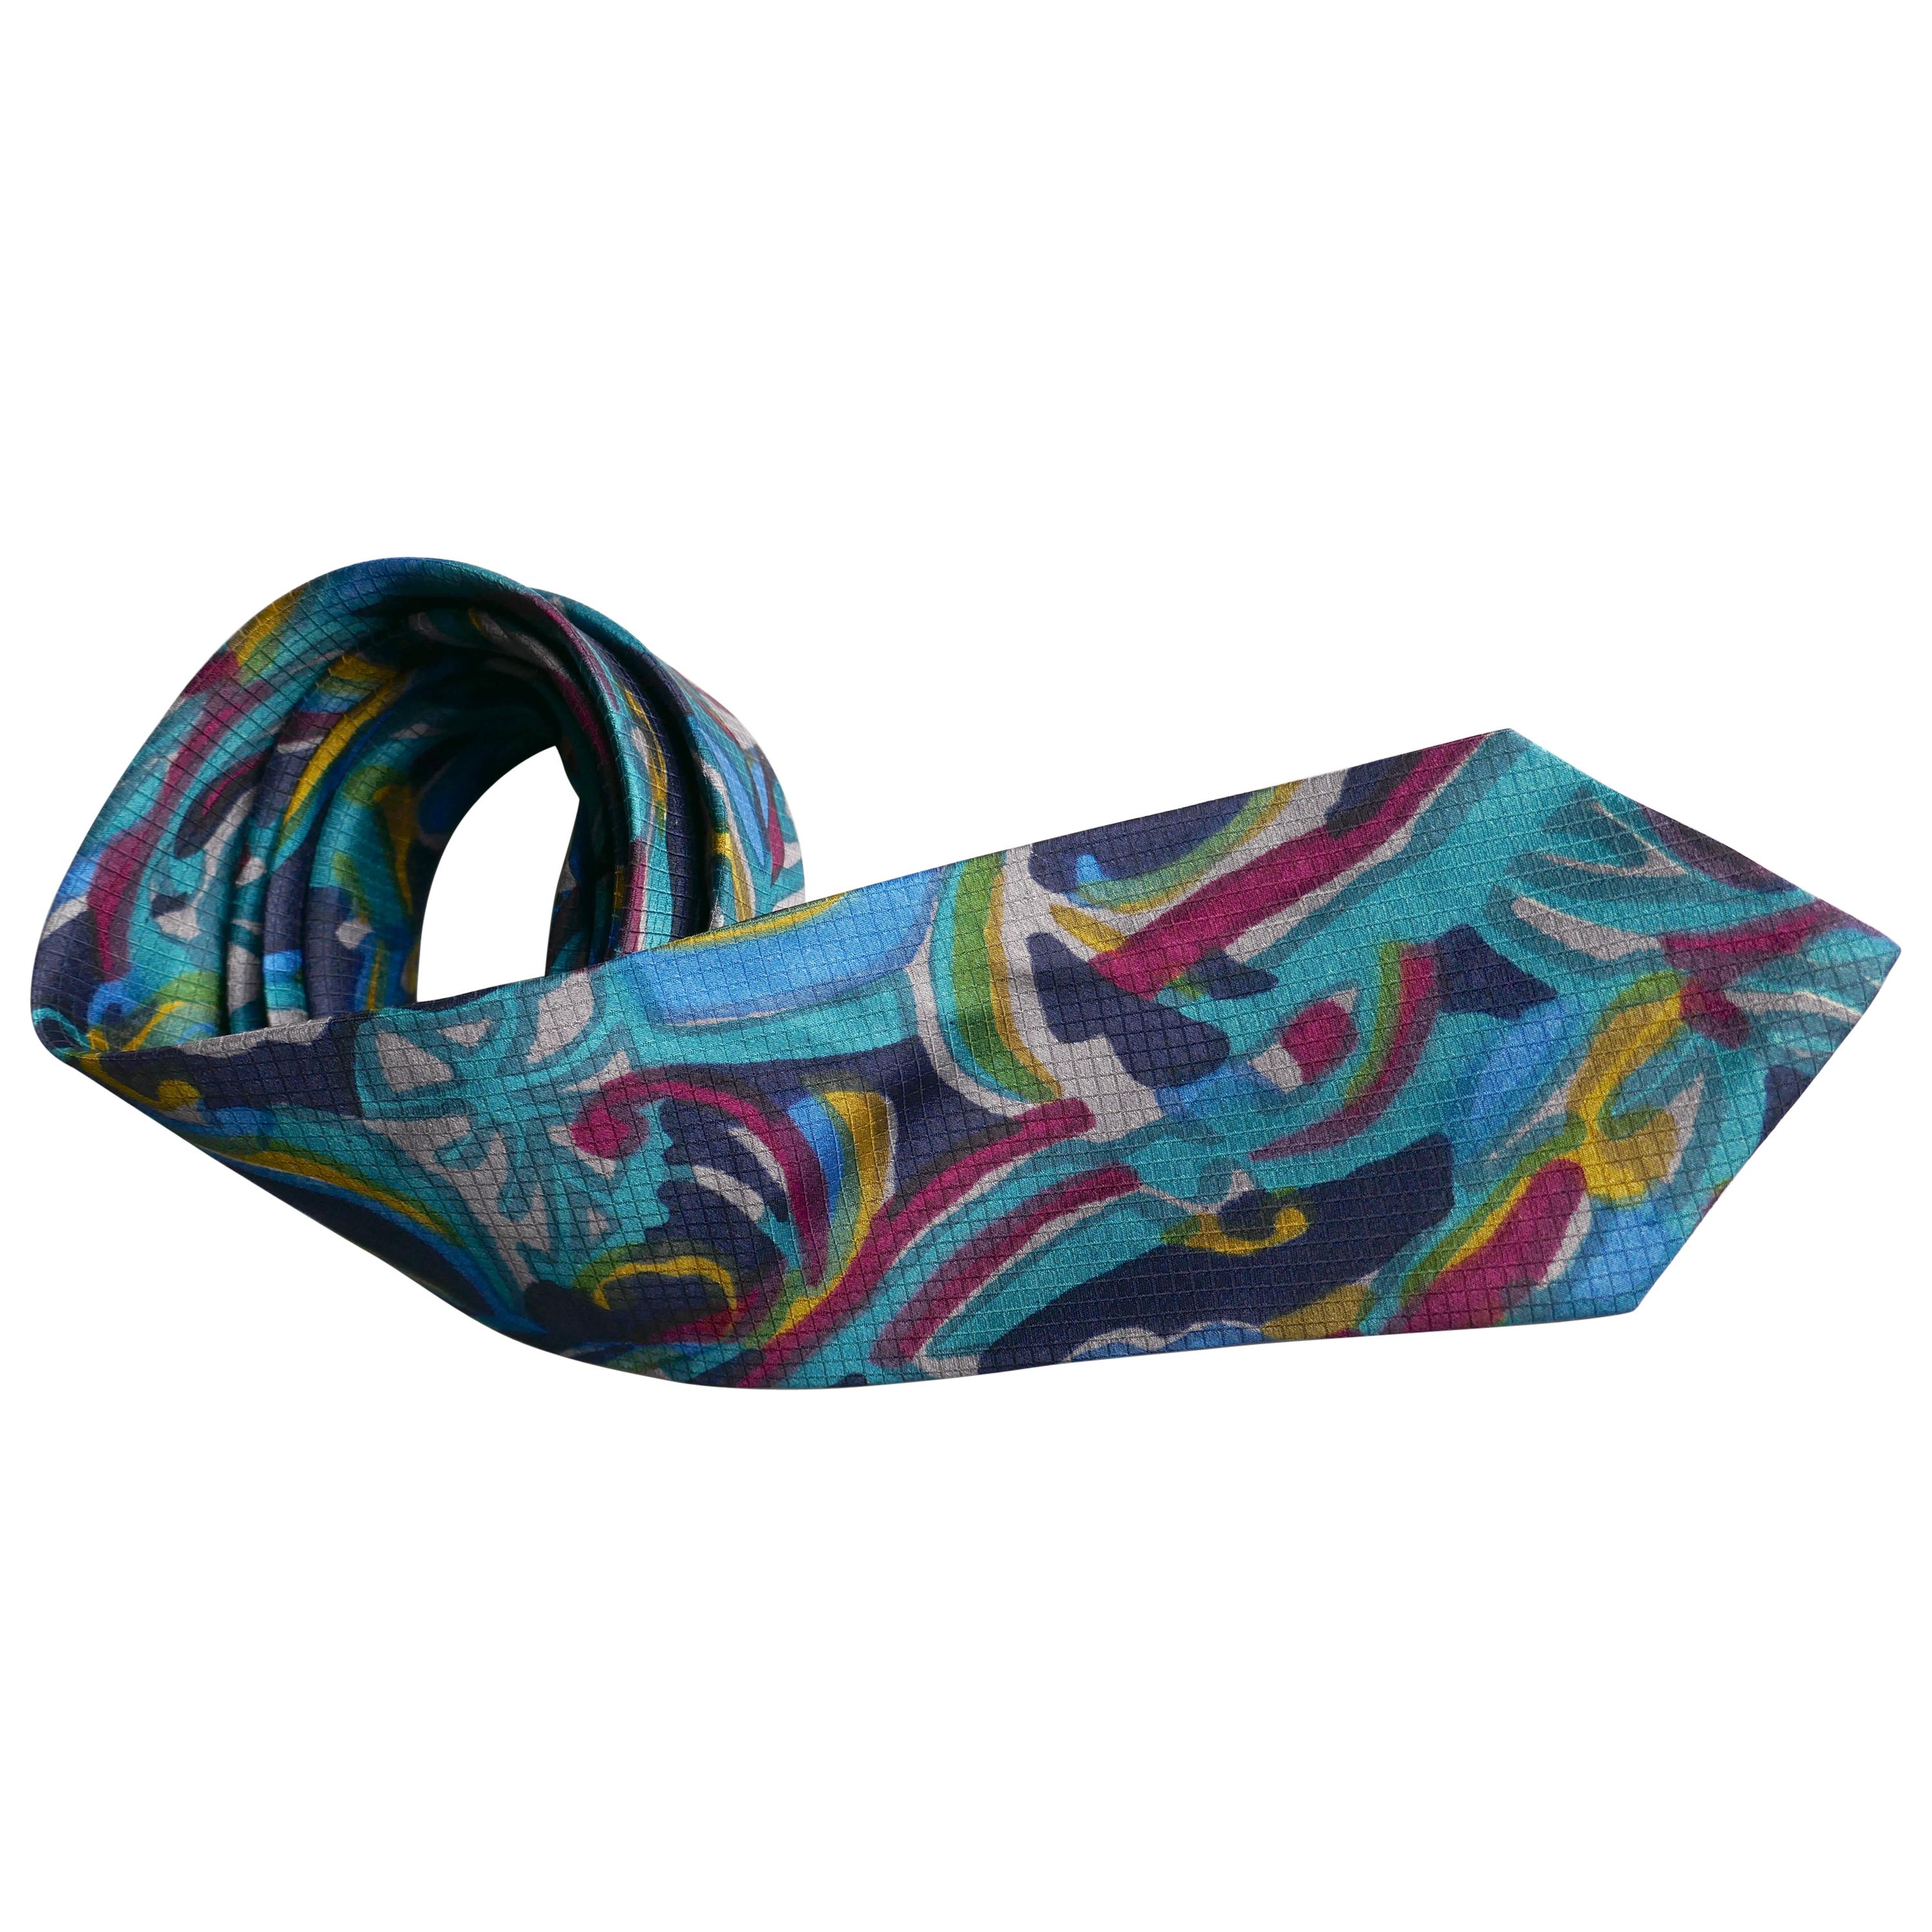 Psychedelic Vintage Retro Silk Tie, Pop Art Classic from 1960s For Sale